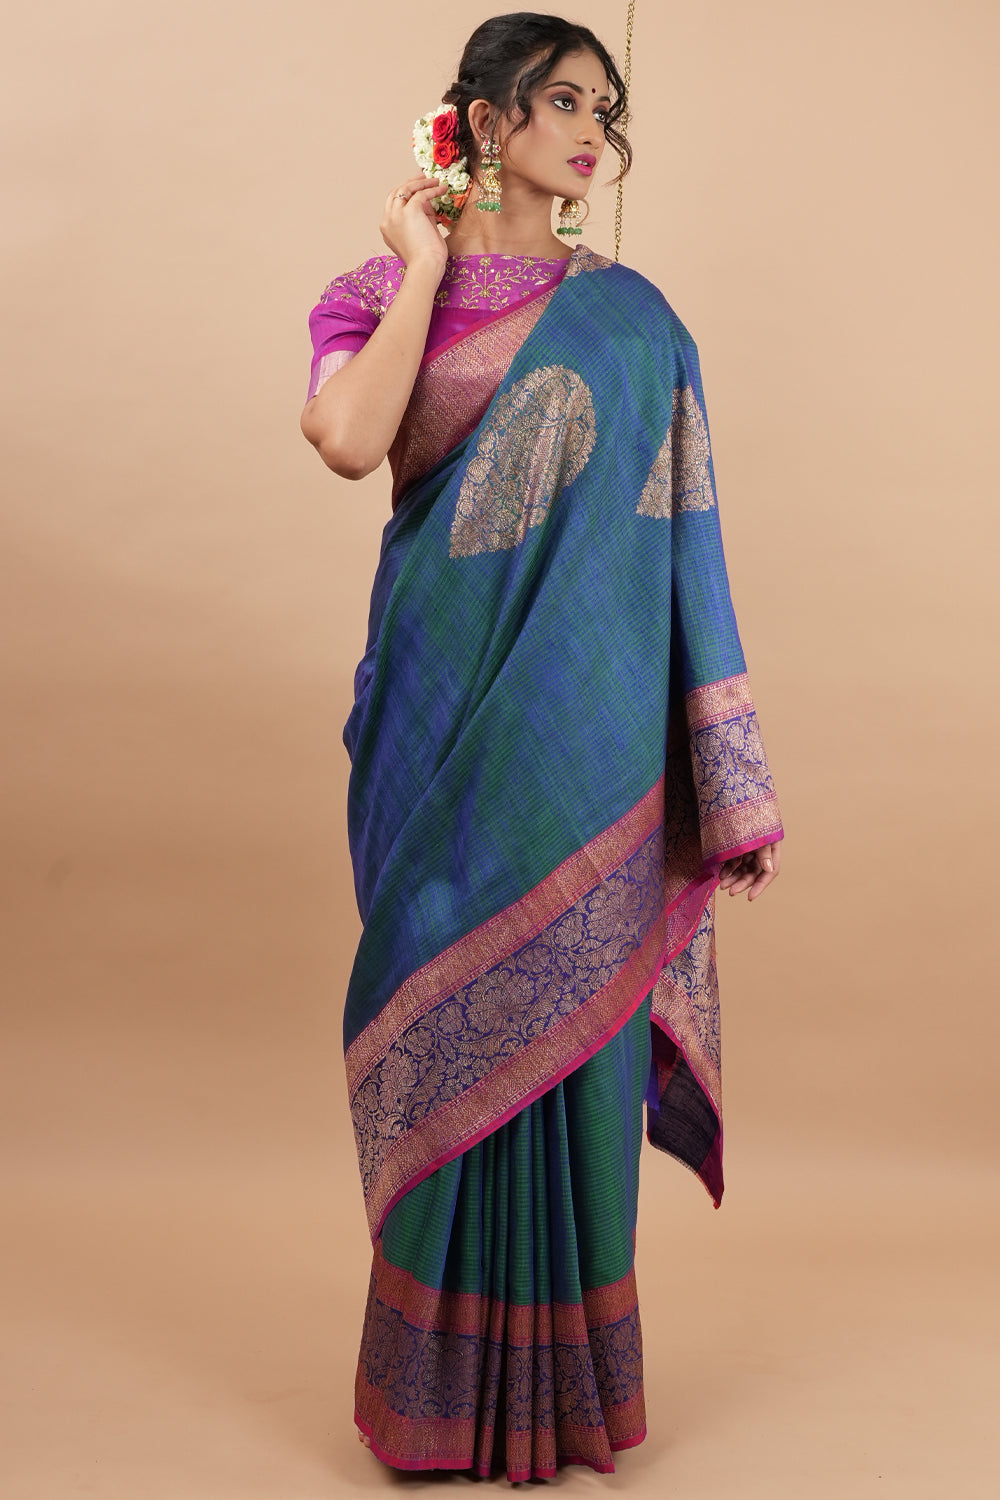 Teal Dupion Banarasi Silk Saree with Two Tone Border and large Antique Damask Motifs in shoulder area |SILK MARK CERTIFIED